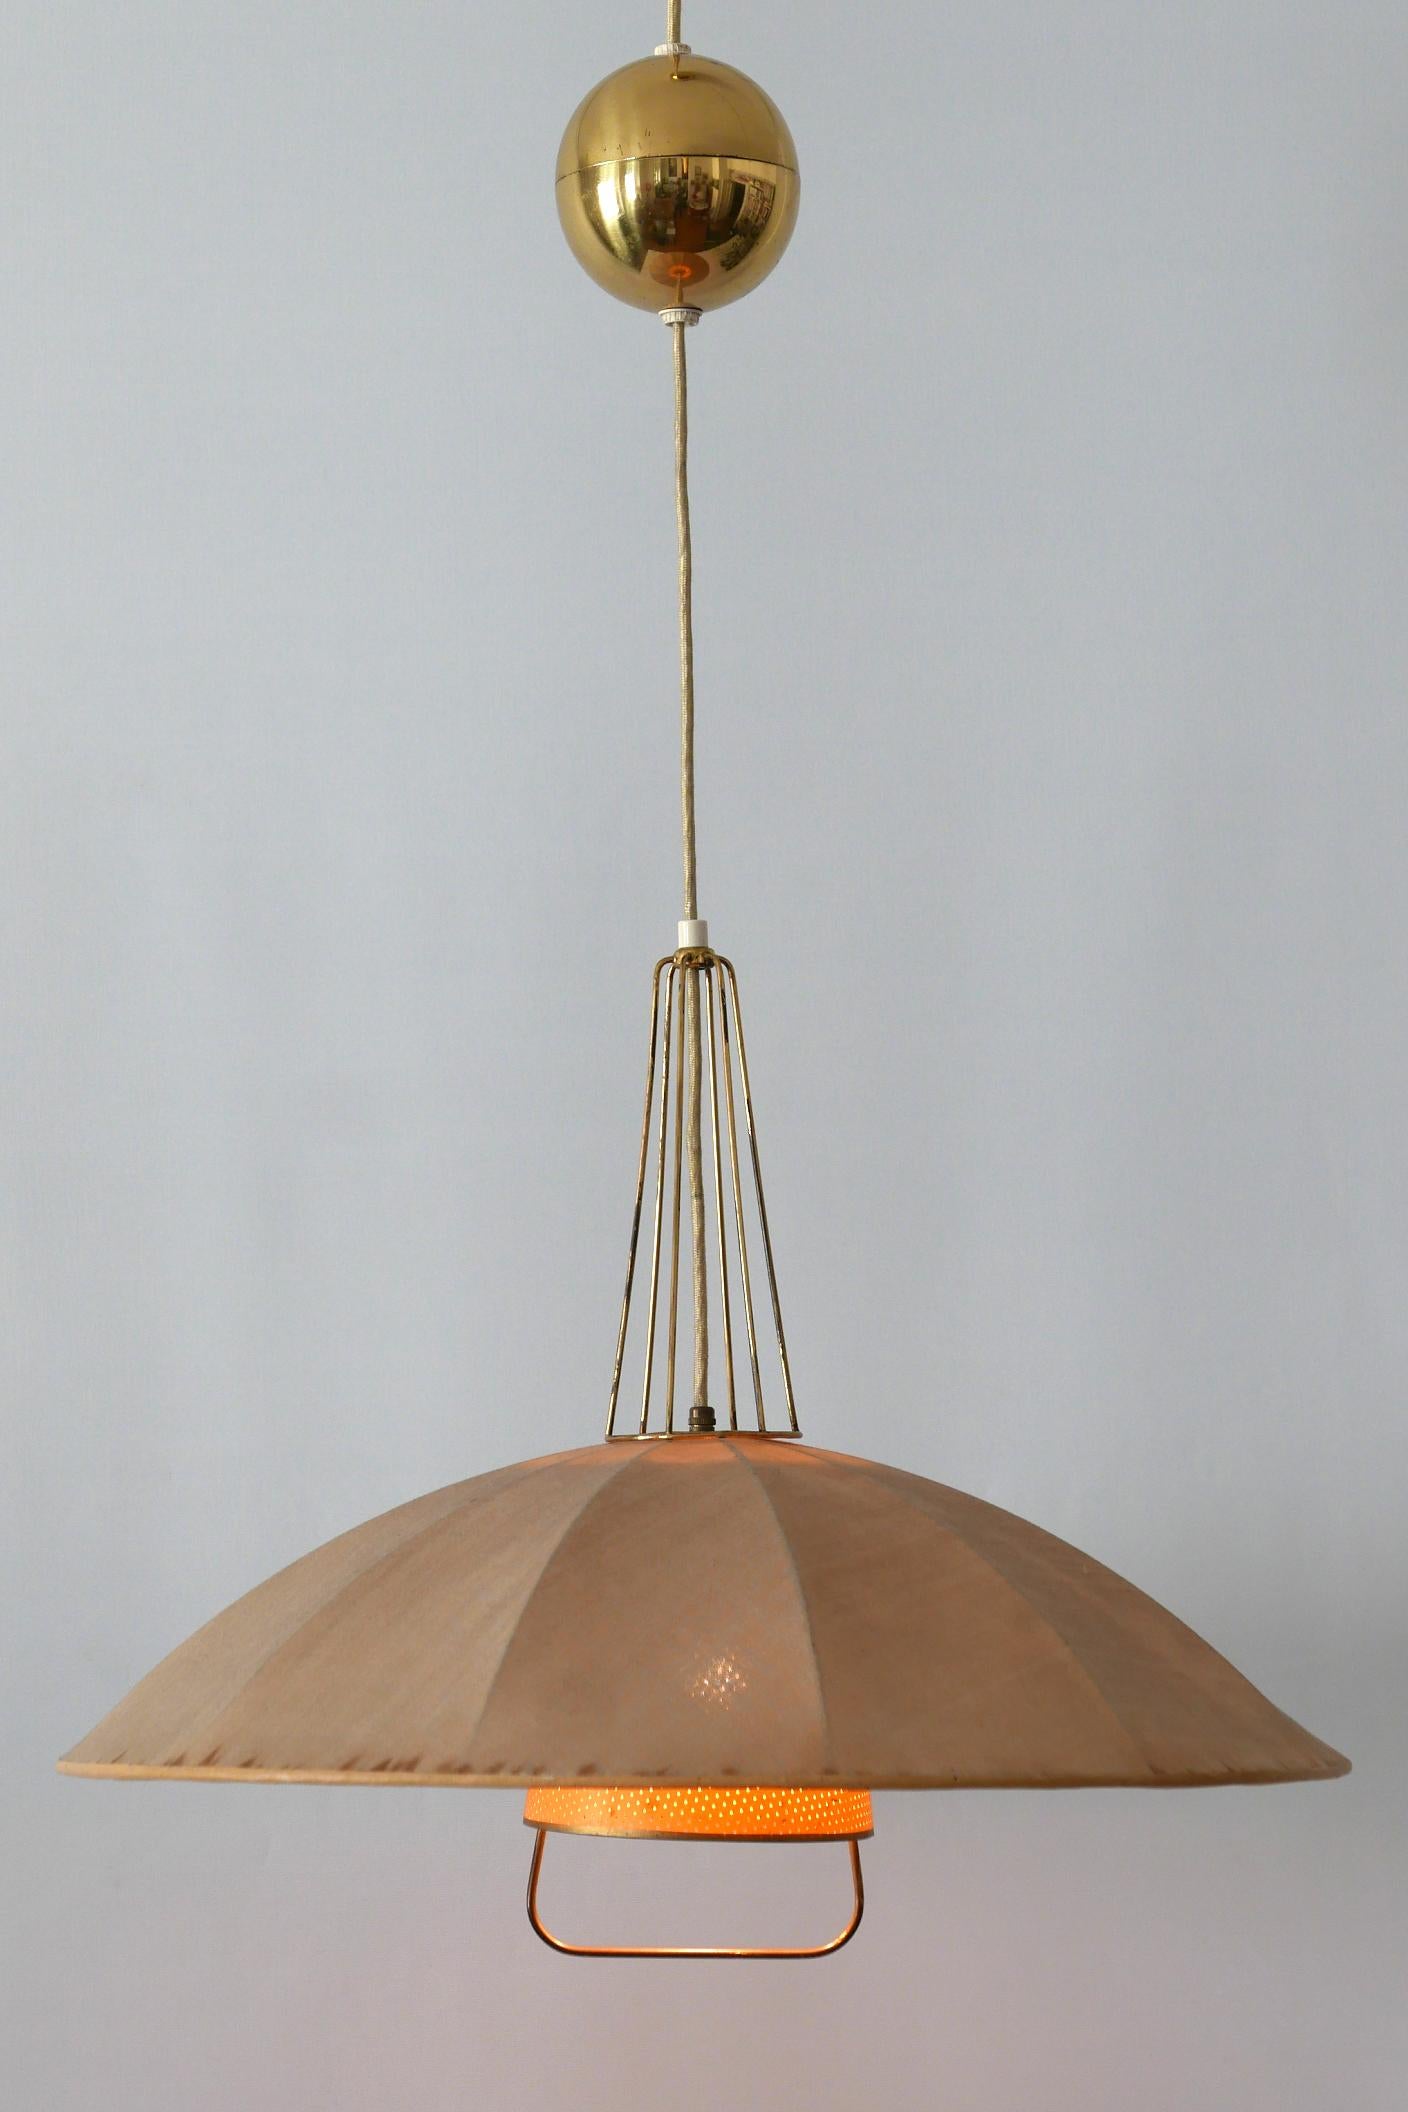 Rare and beautiful Mid-Century Modern counterweight pendant lamp or hanging light. Designed and manufactured probably in 1950s in Germany. Due to the cord egg, the hanging height is easily adjustable.

Executed in brass, metal and fabric, it needs